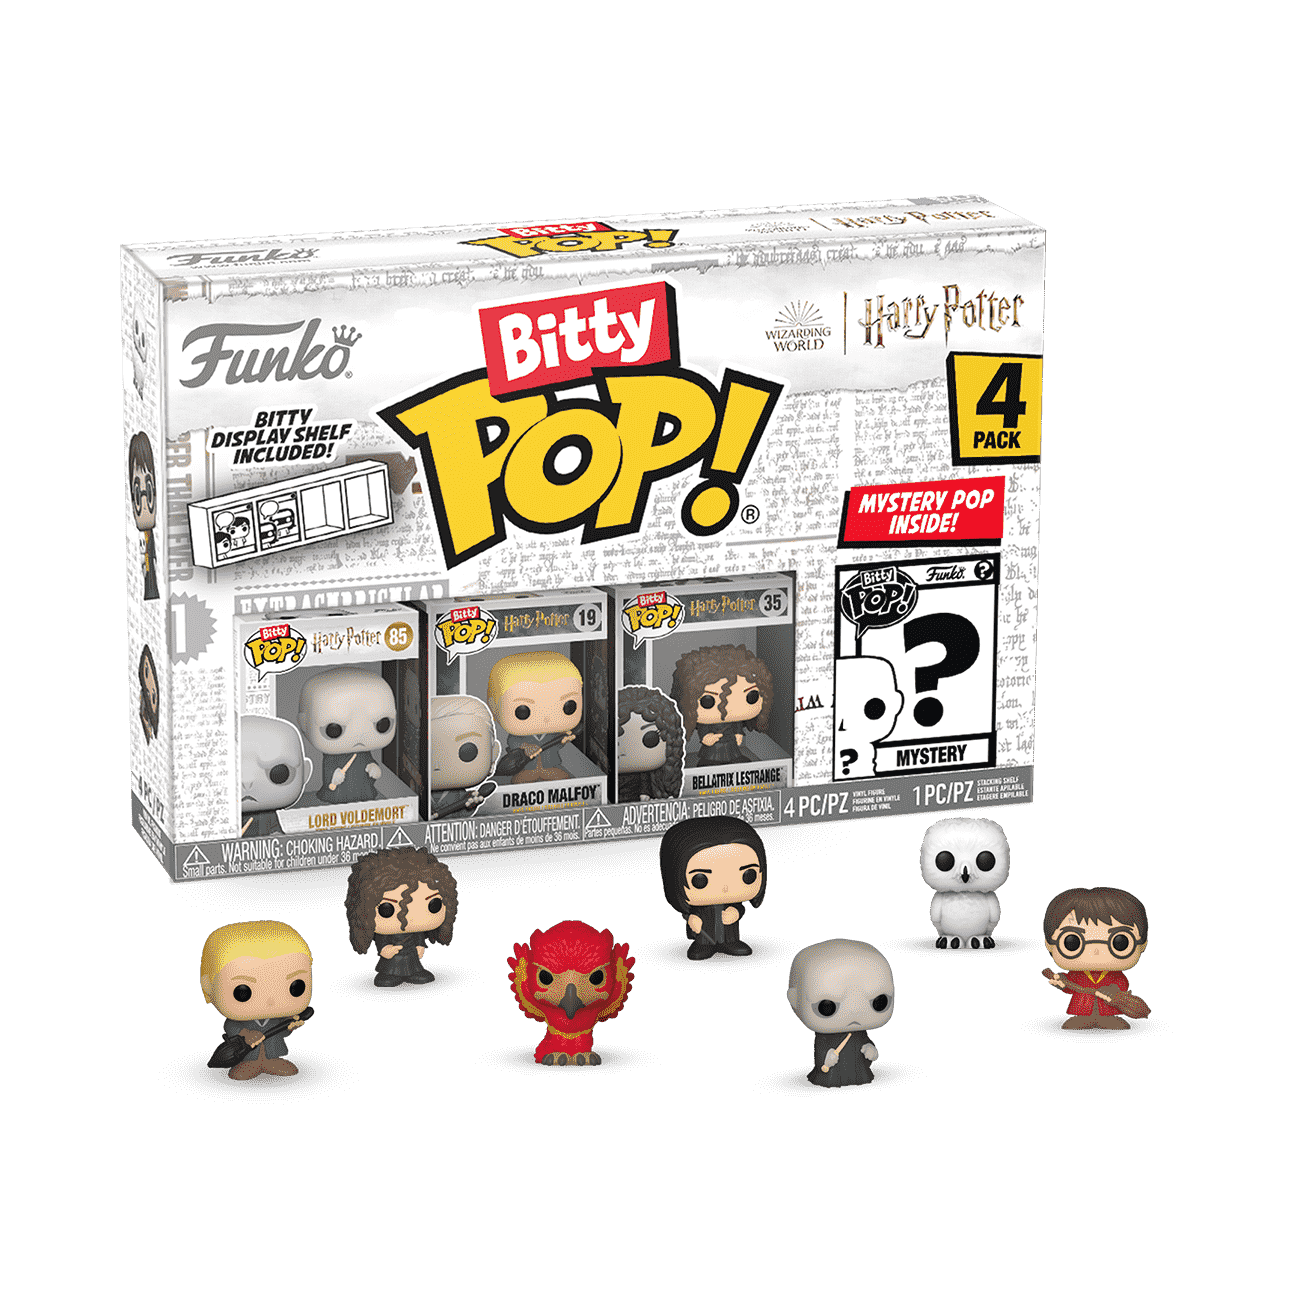 Buy Bitty Pop! Harry Potter 4-Pack Series 4 at Funko.